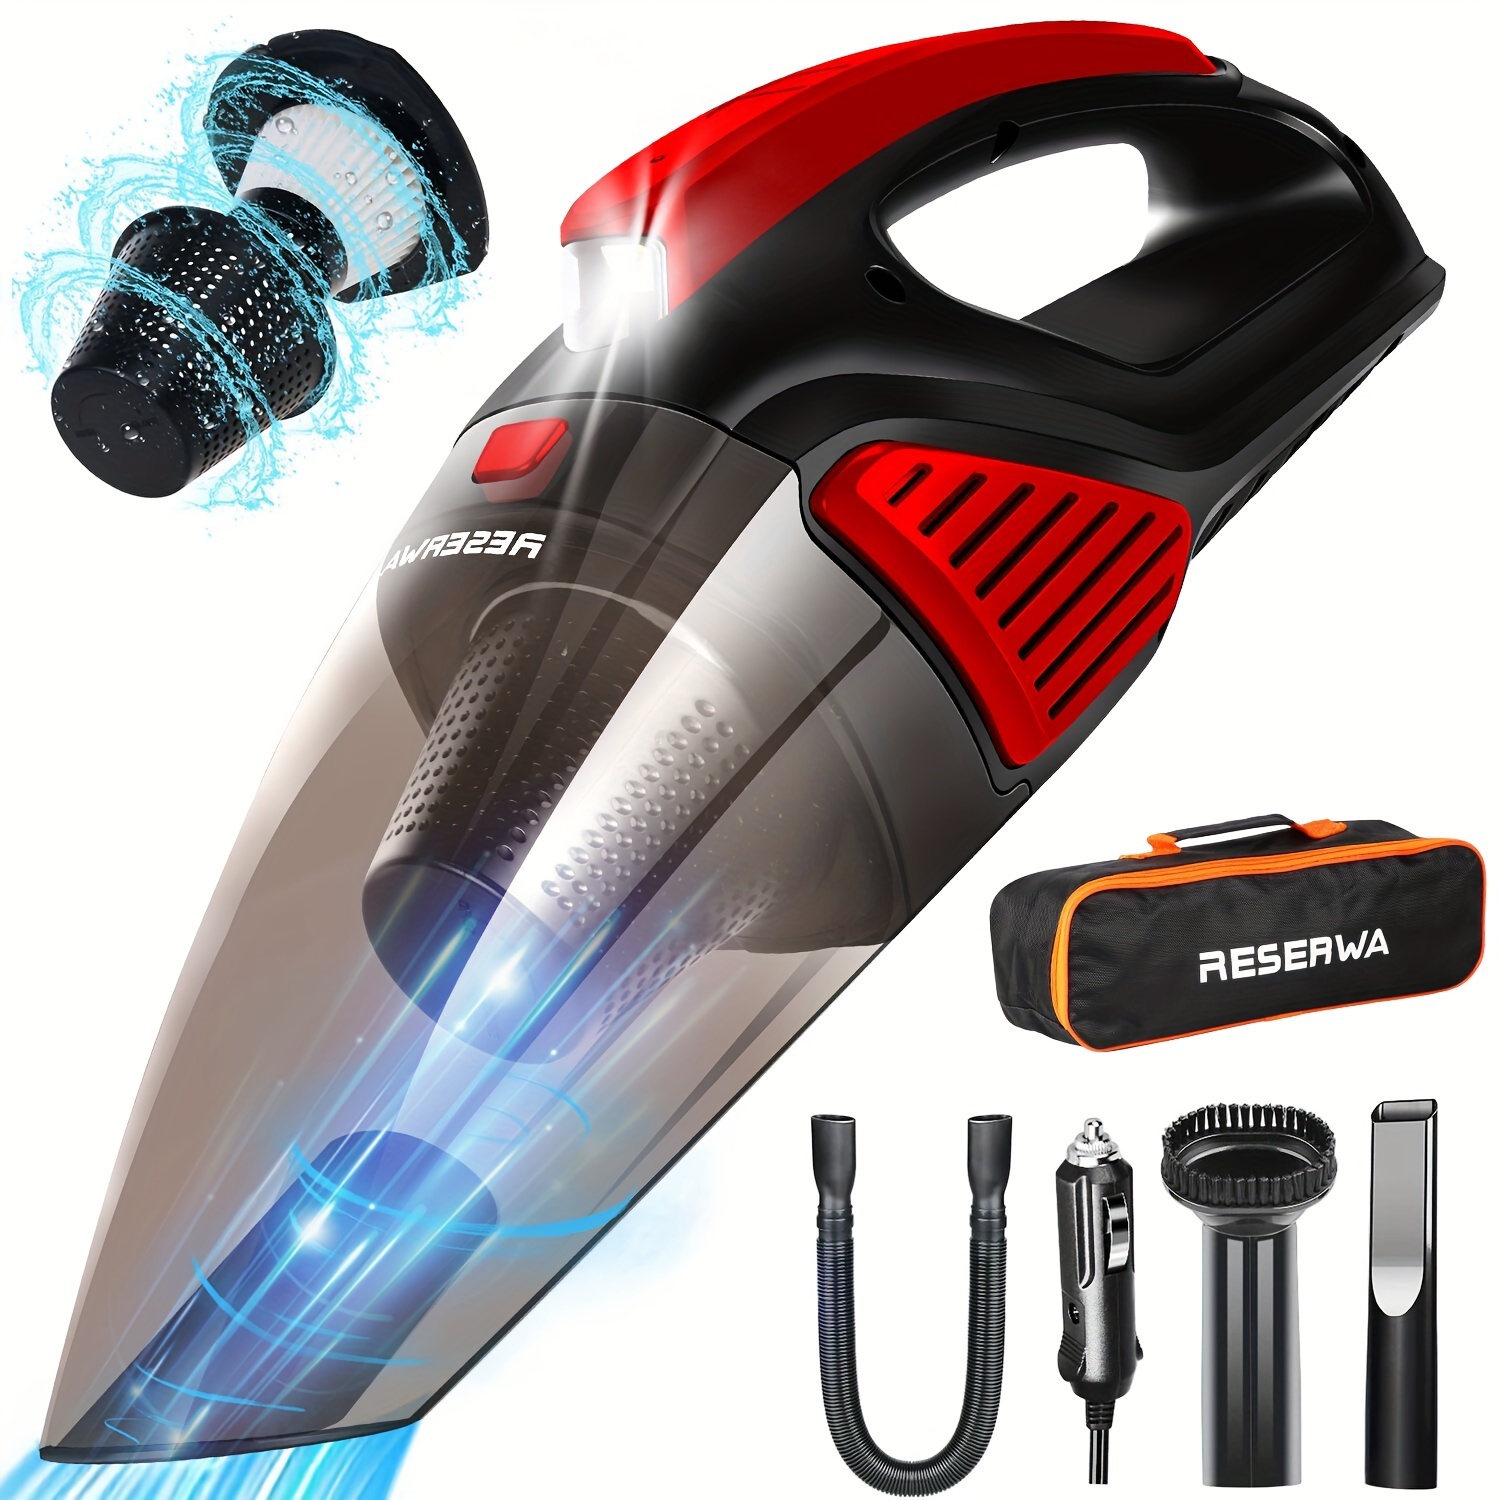 

Reserwa Double Filter Car Vacuum With Led Lights 7500pa 12v 16.4ft Cable Portable Handheld Car Vacuum Cleaner Wet & Dry Car Vacuum Cleaner